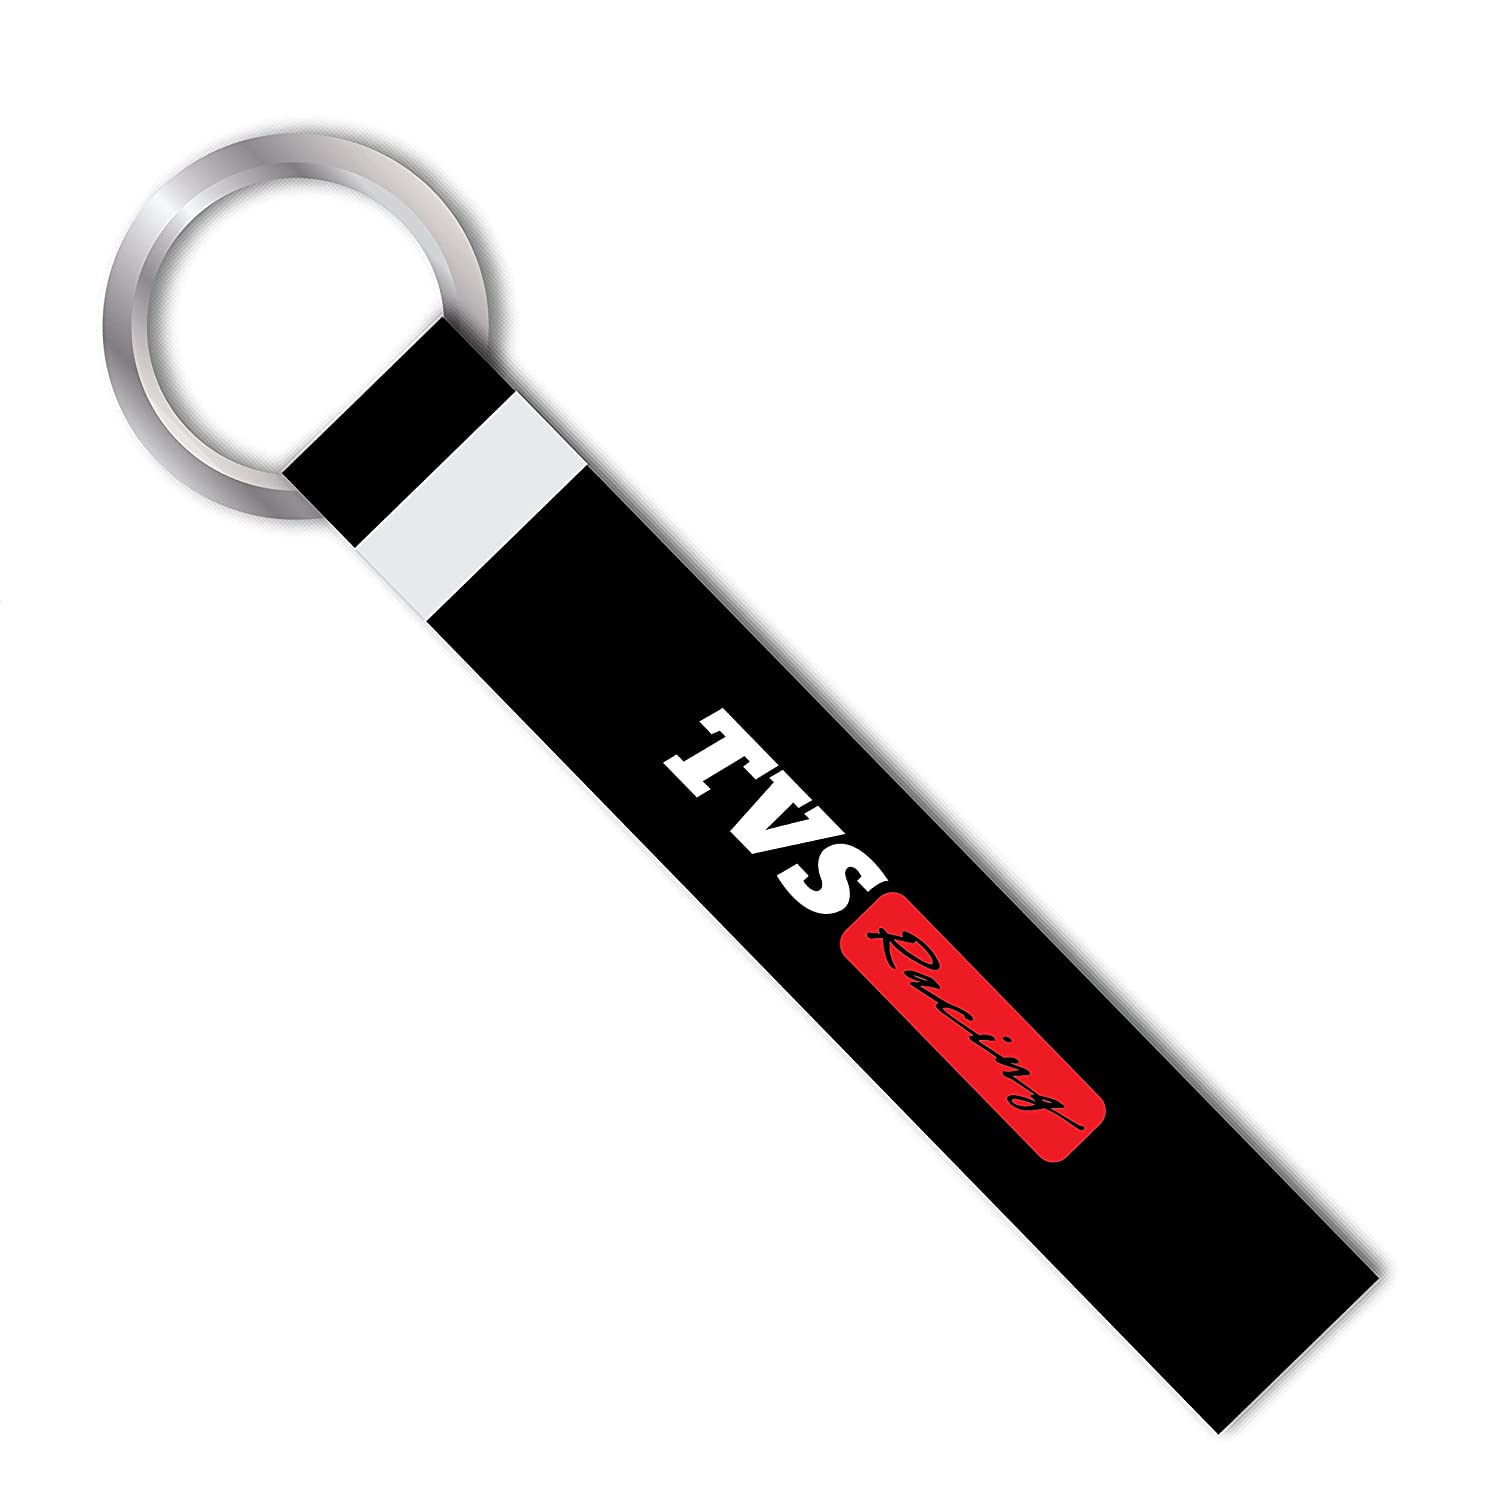 sarkkart tvs Apache key chain for all types of bikes and scooty with alloy  and high quality band red black colour - Sarkkart